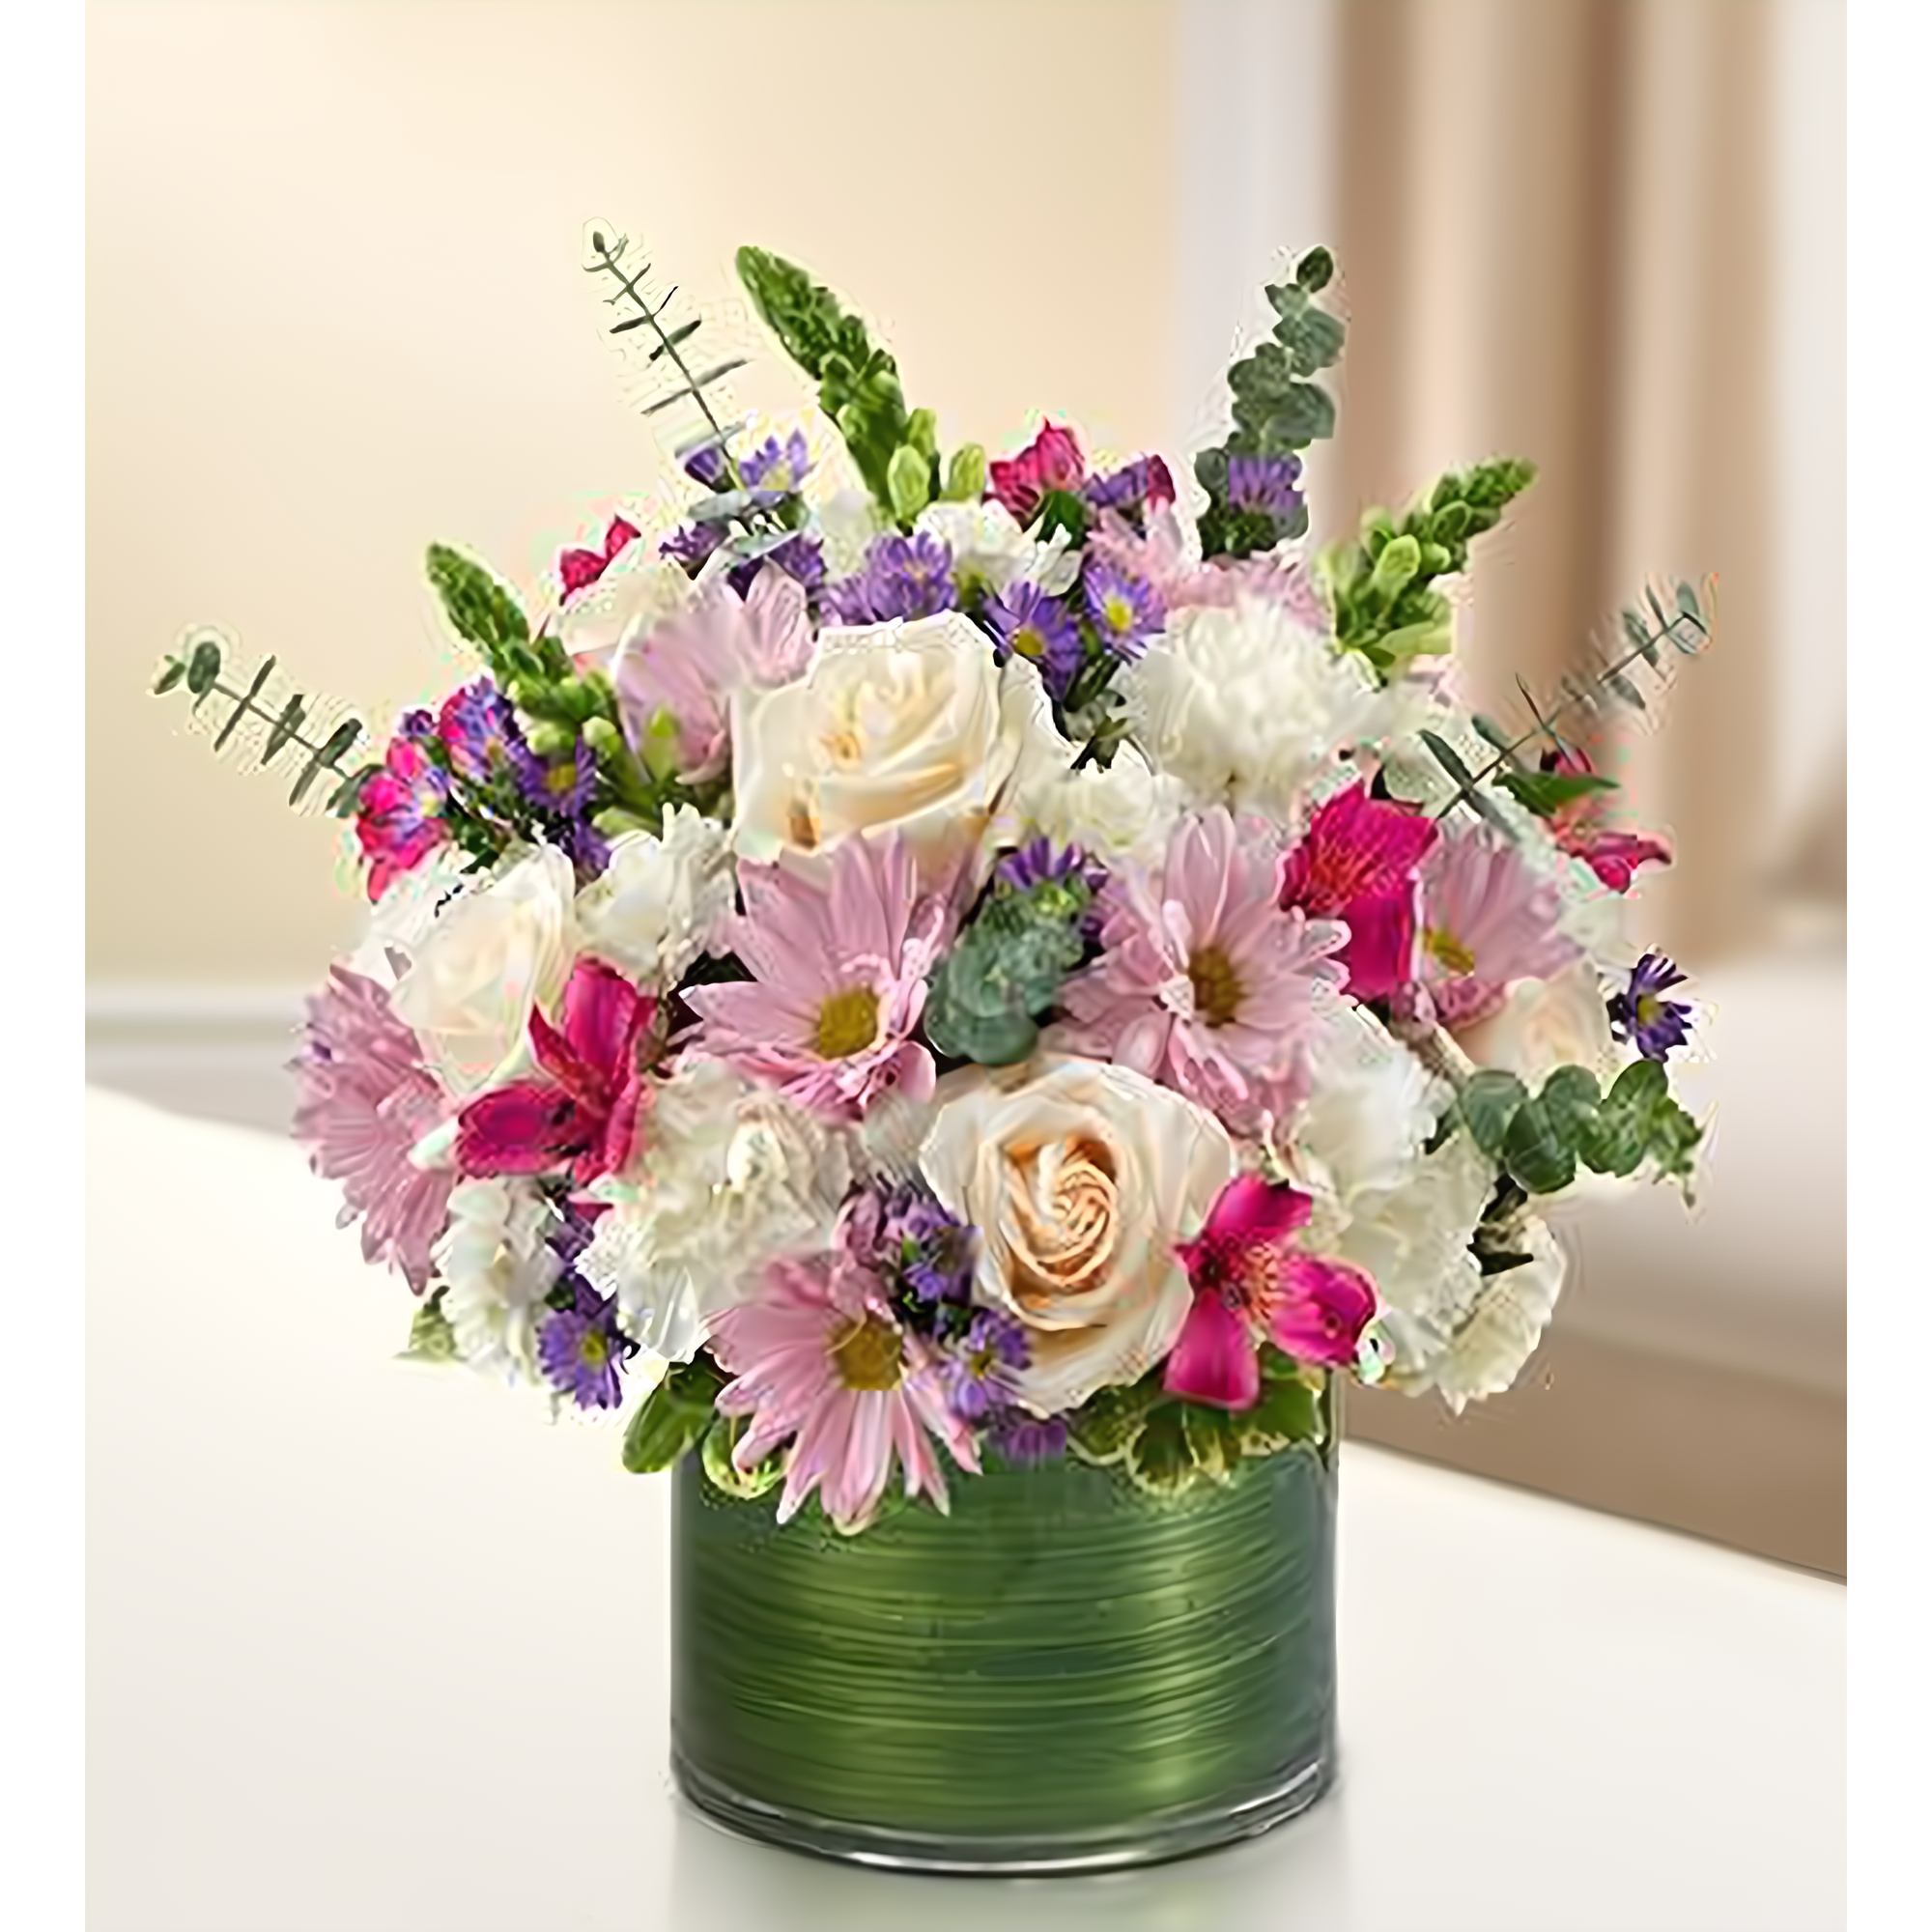 NYC Flower Delivery - Cherished Memories - Lavender and White - Funeral > Vase Arrangements